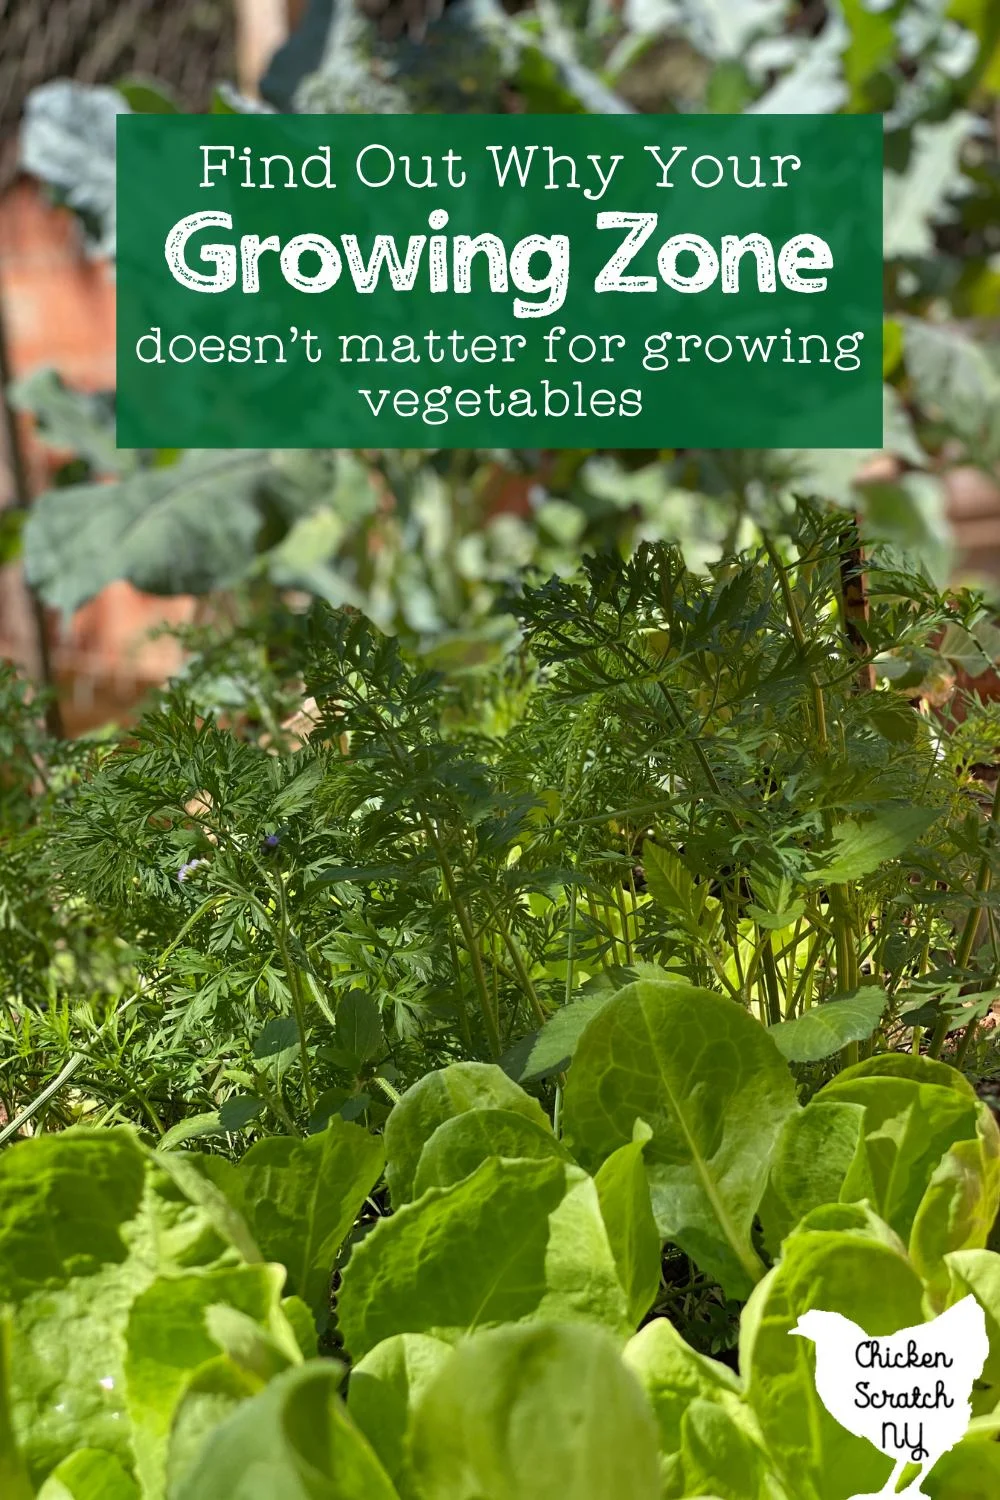 close up image of a vegetable garden showing carrot tops and spinach with text overlay "find out why your growing zone doesn't matter for growing vegetables"